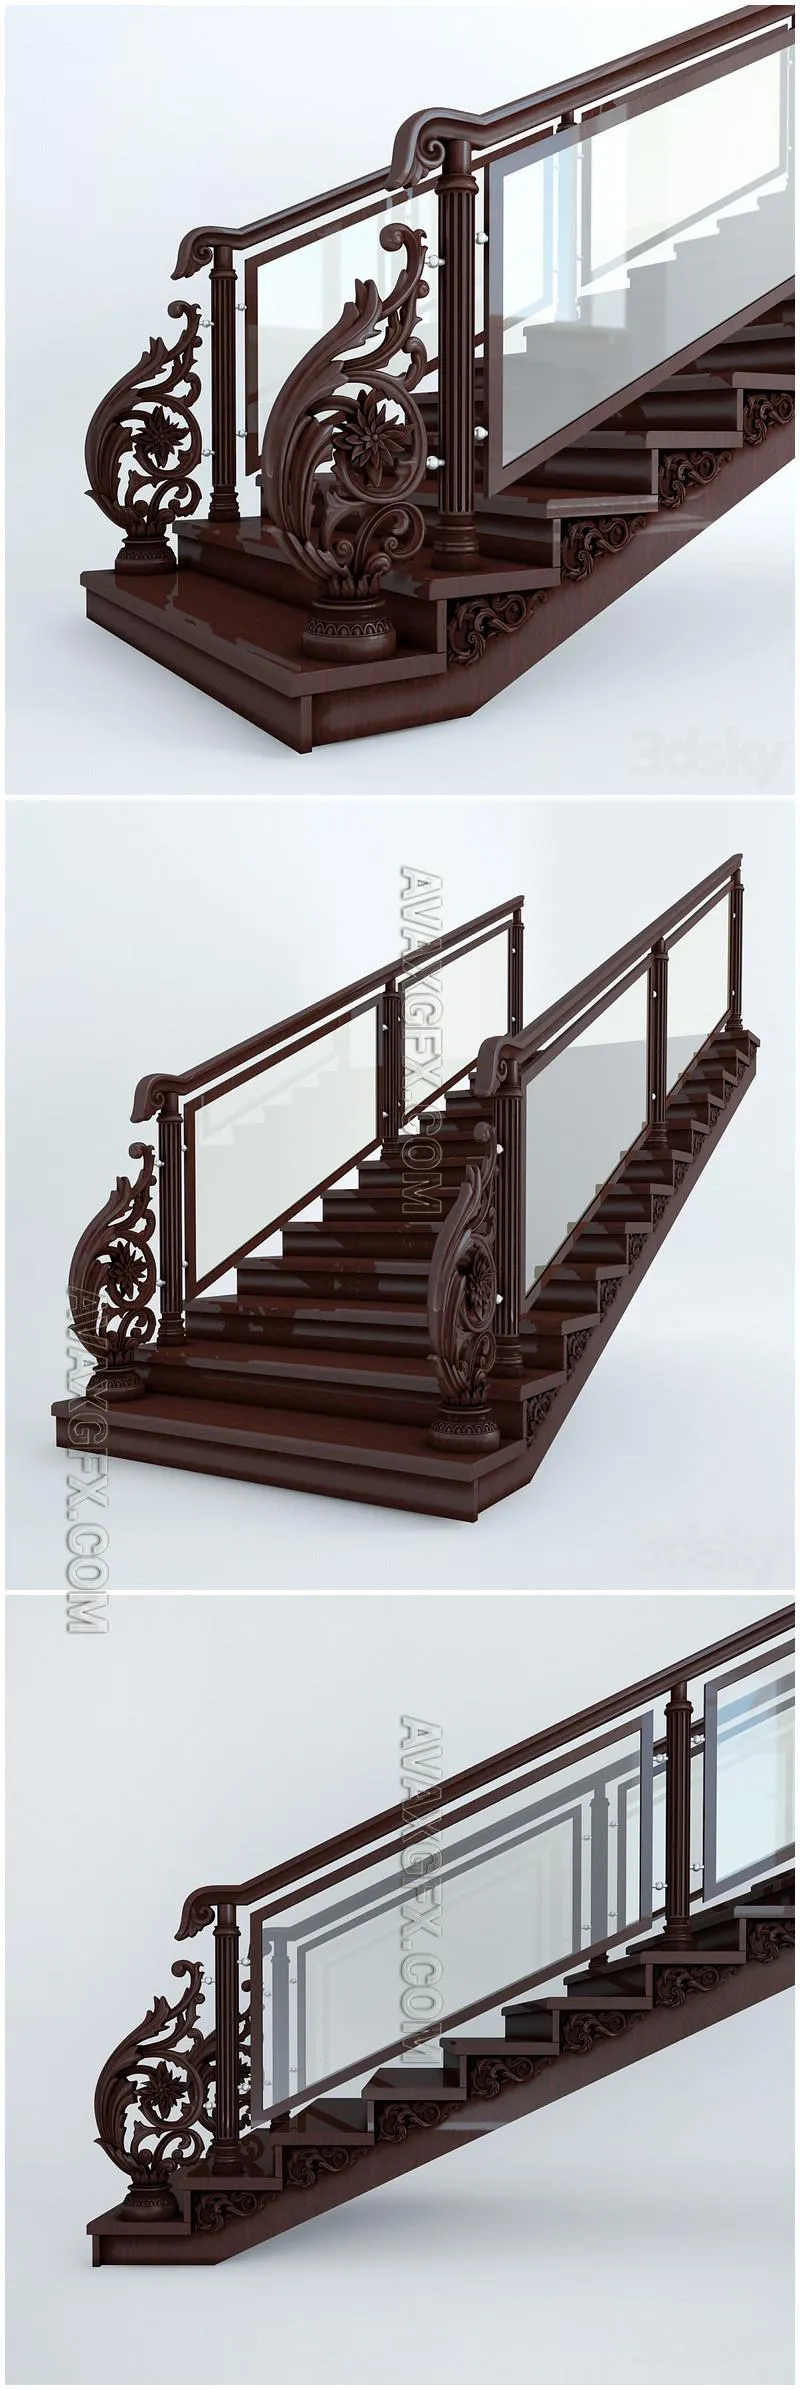 Staircase 2525 - 3D Model